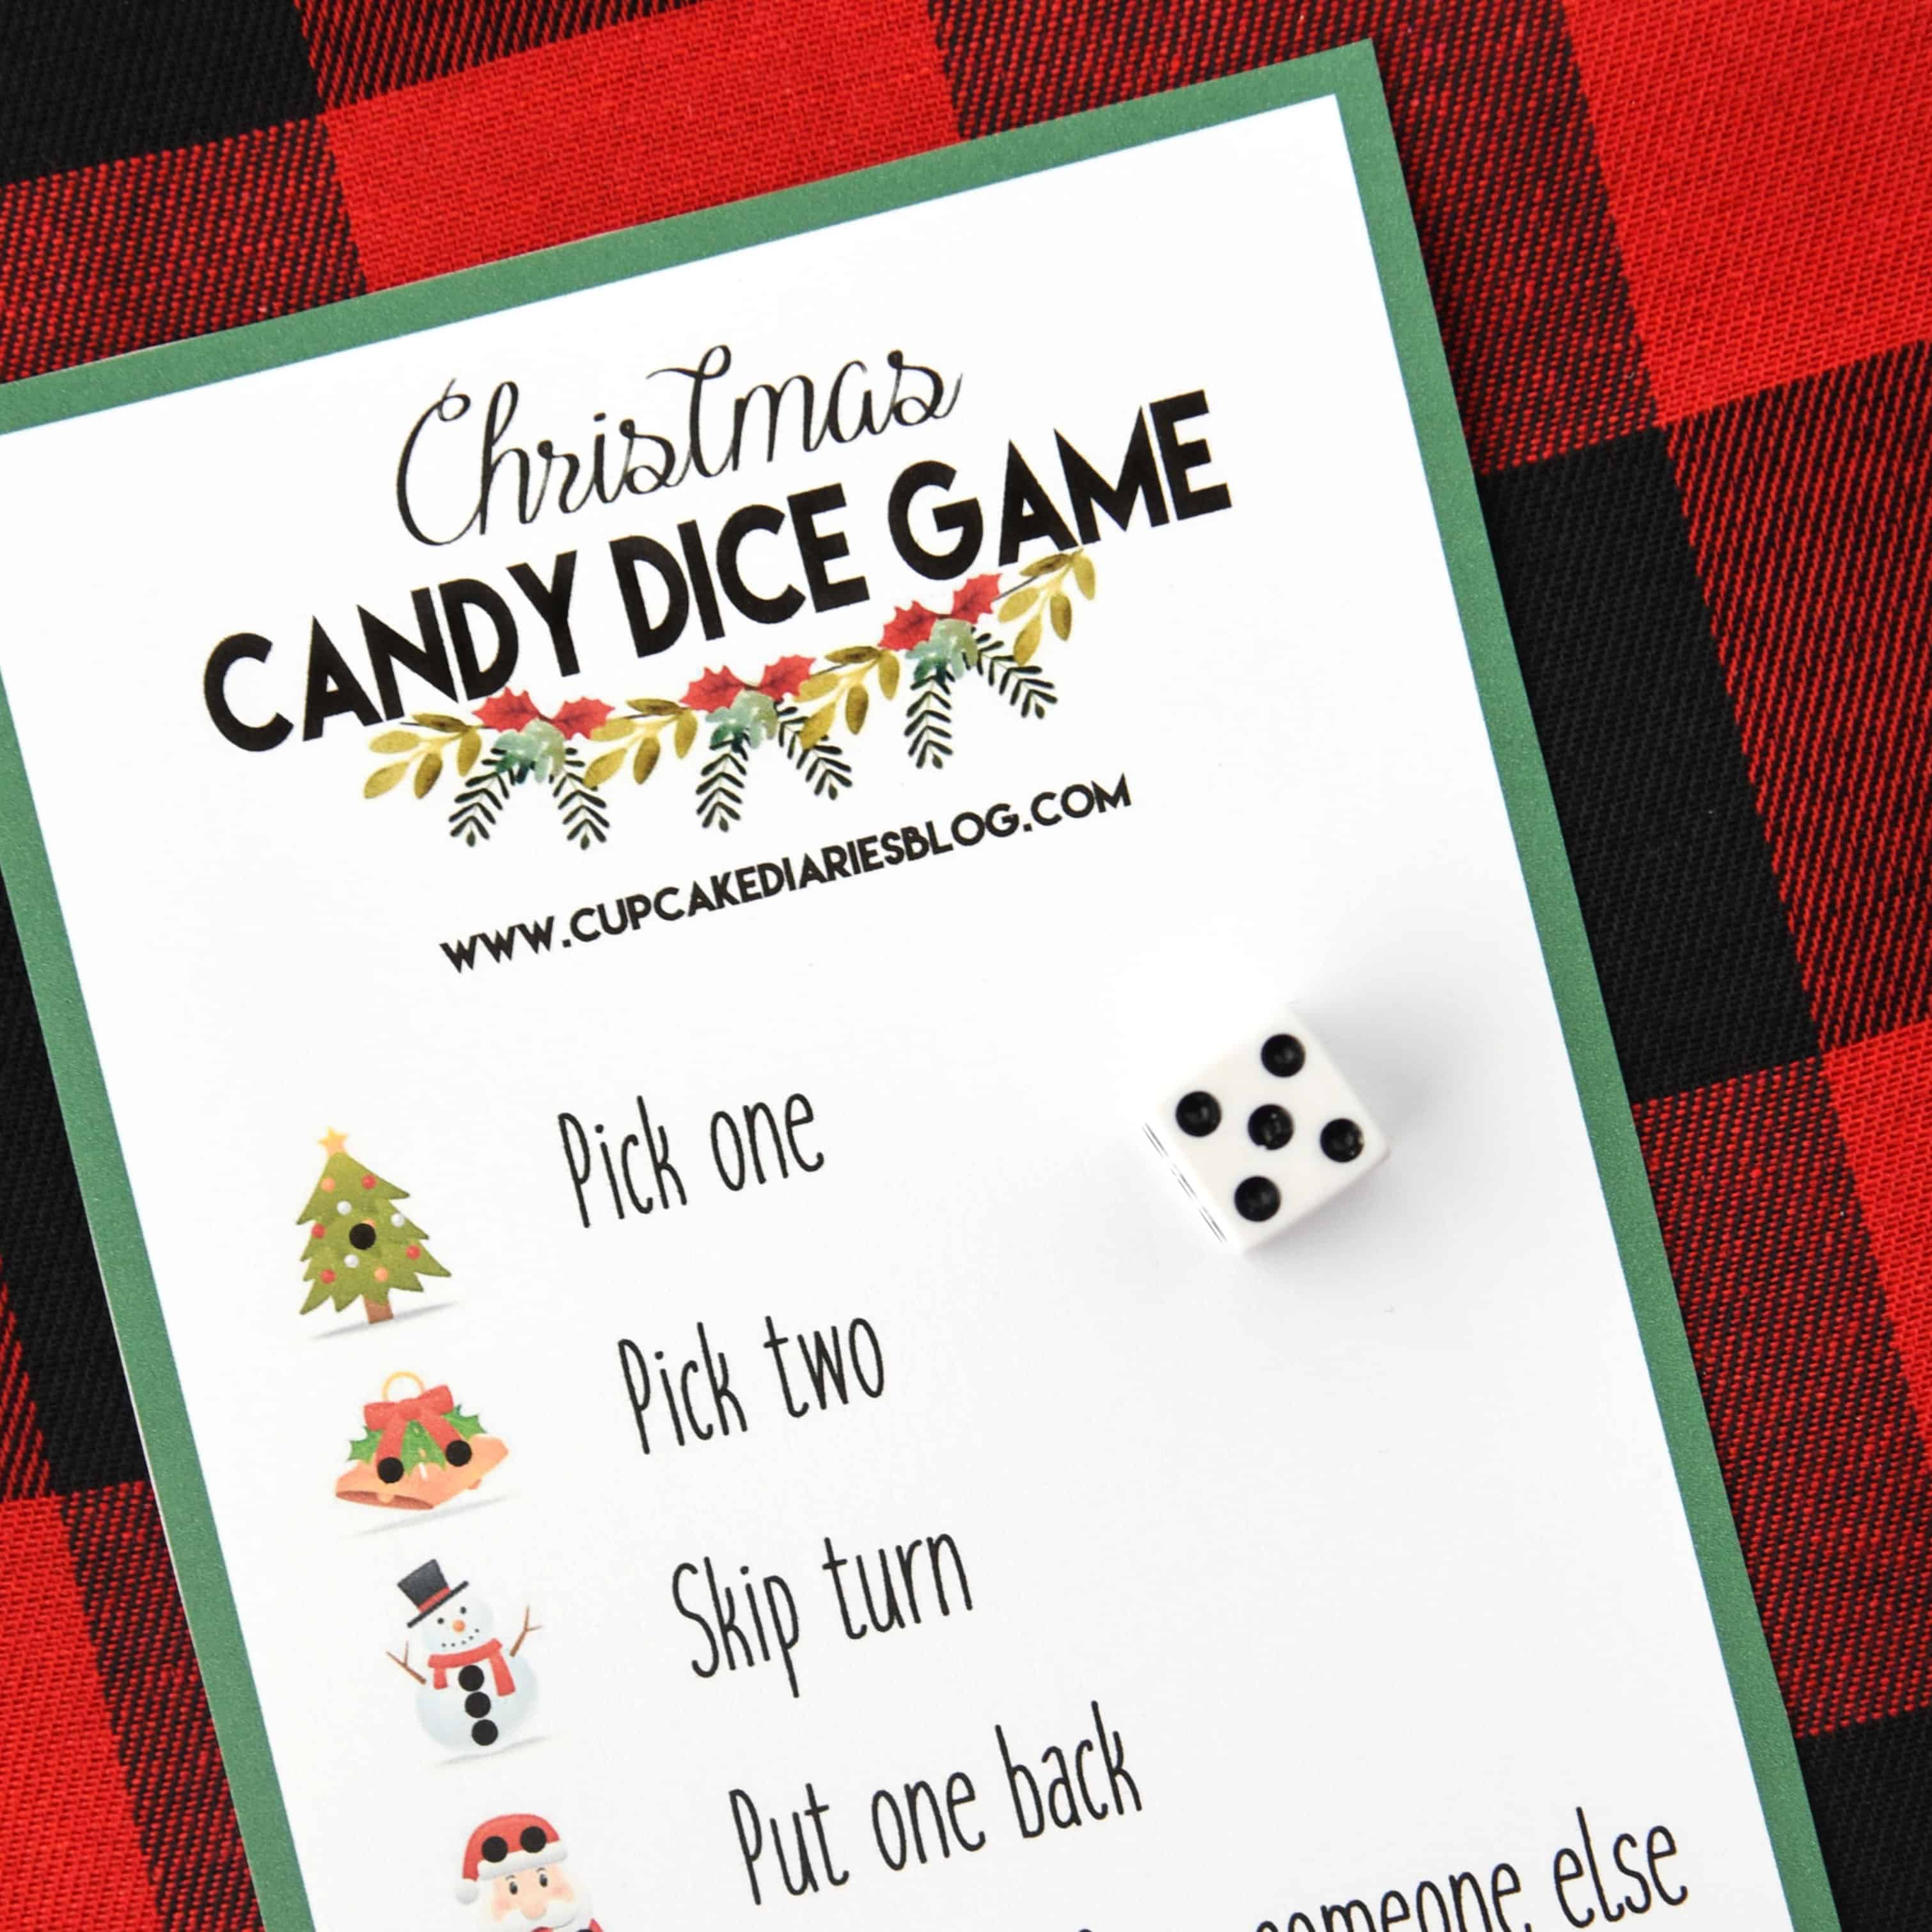 Christmas Candy Dice Game - A fun and easy game for the kids!